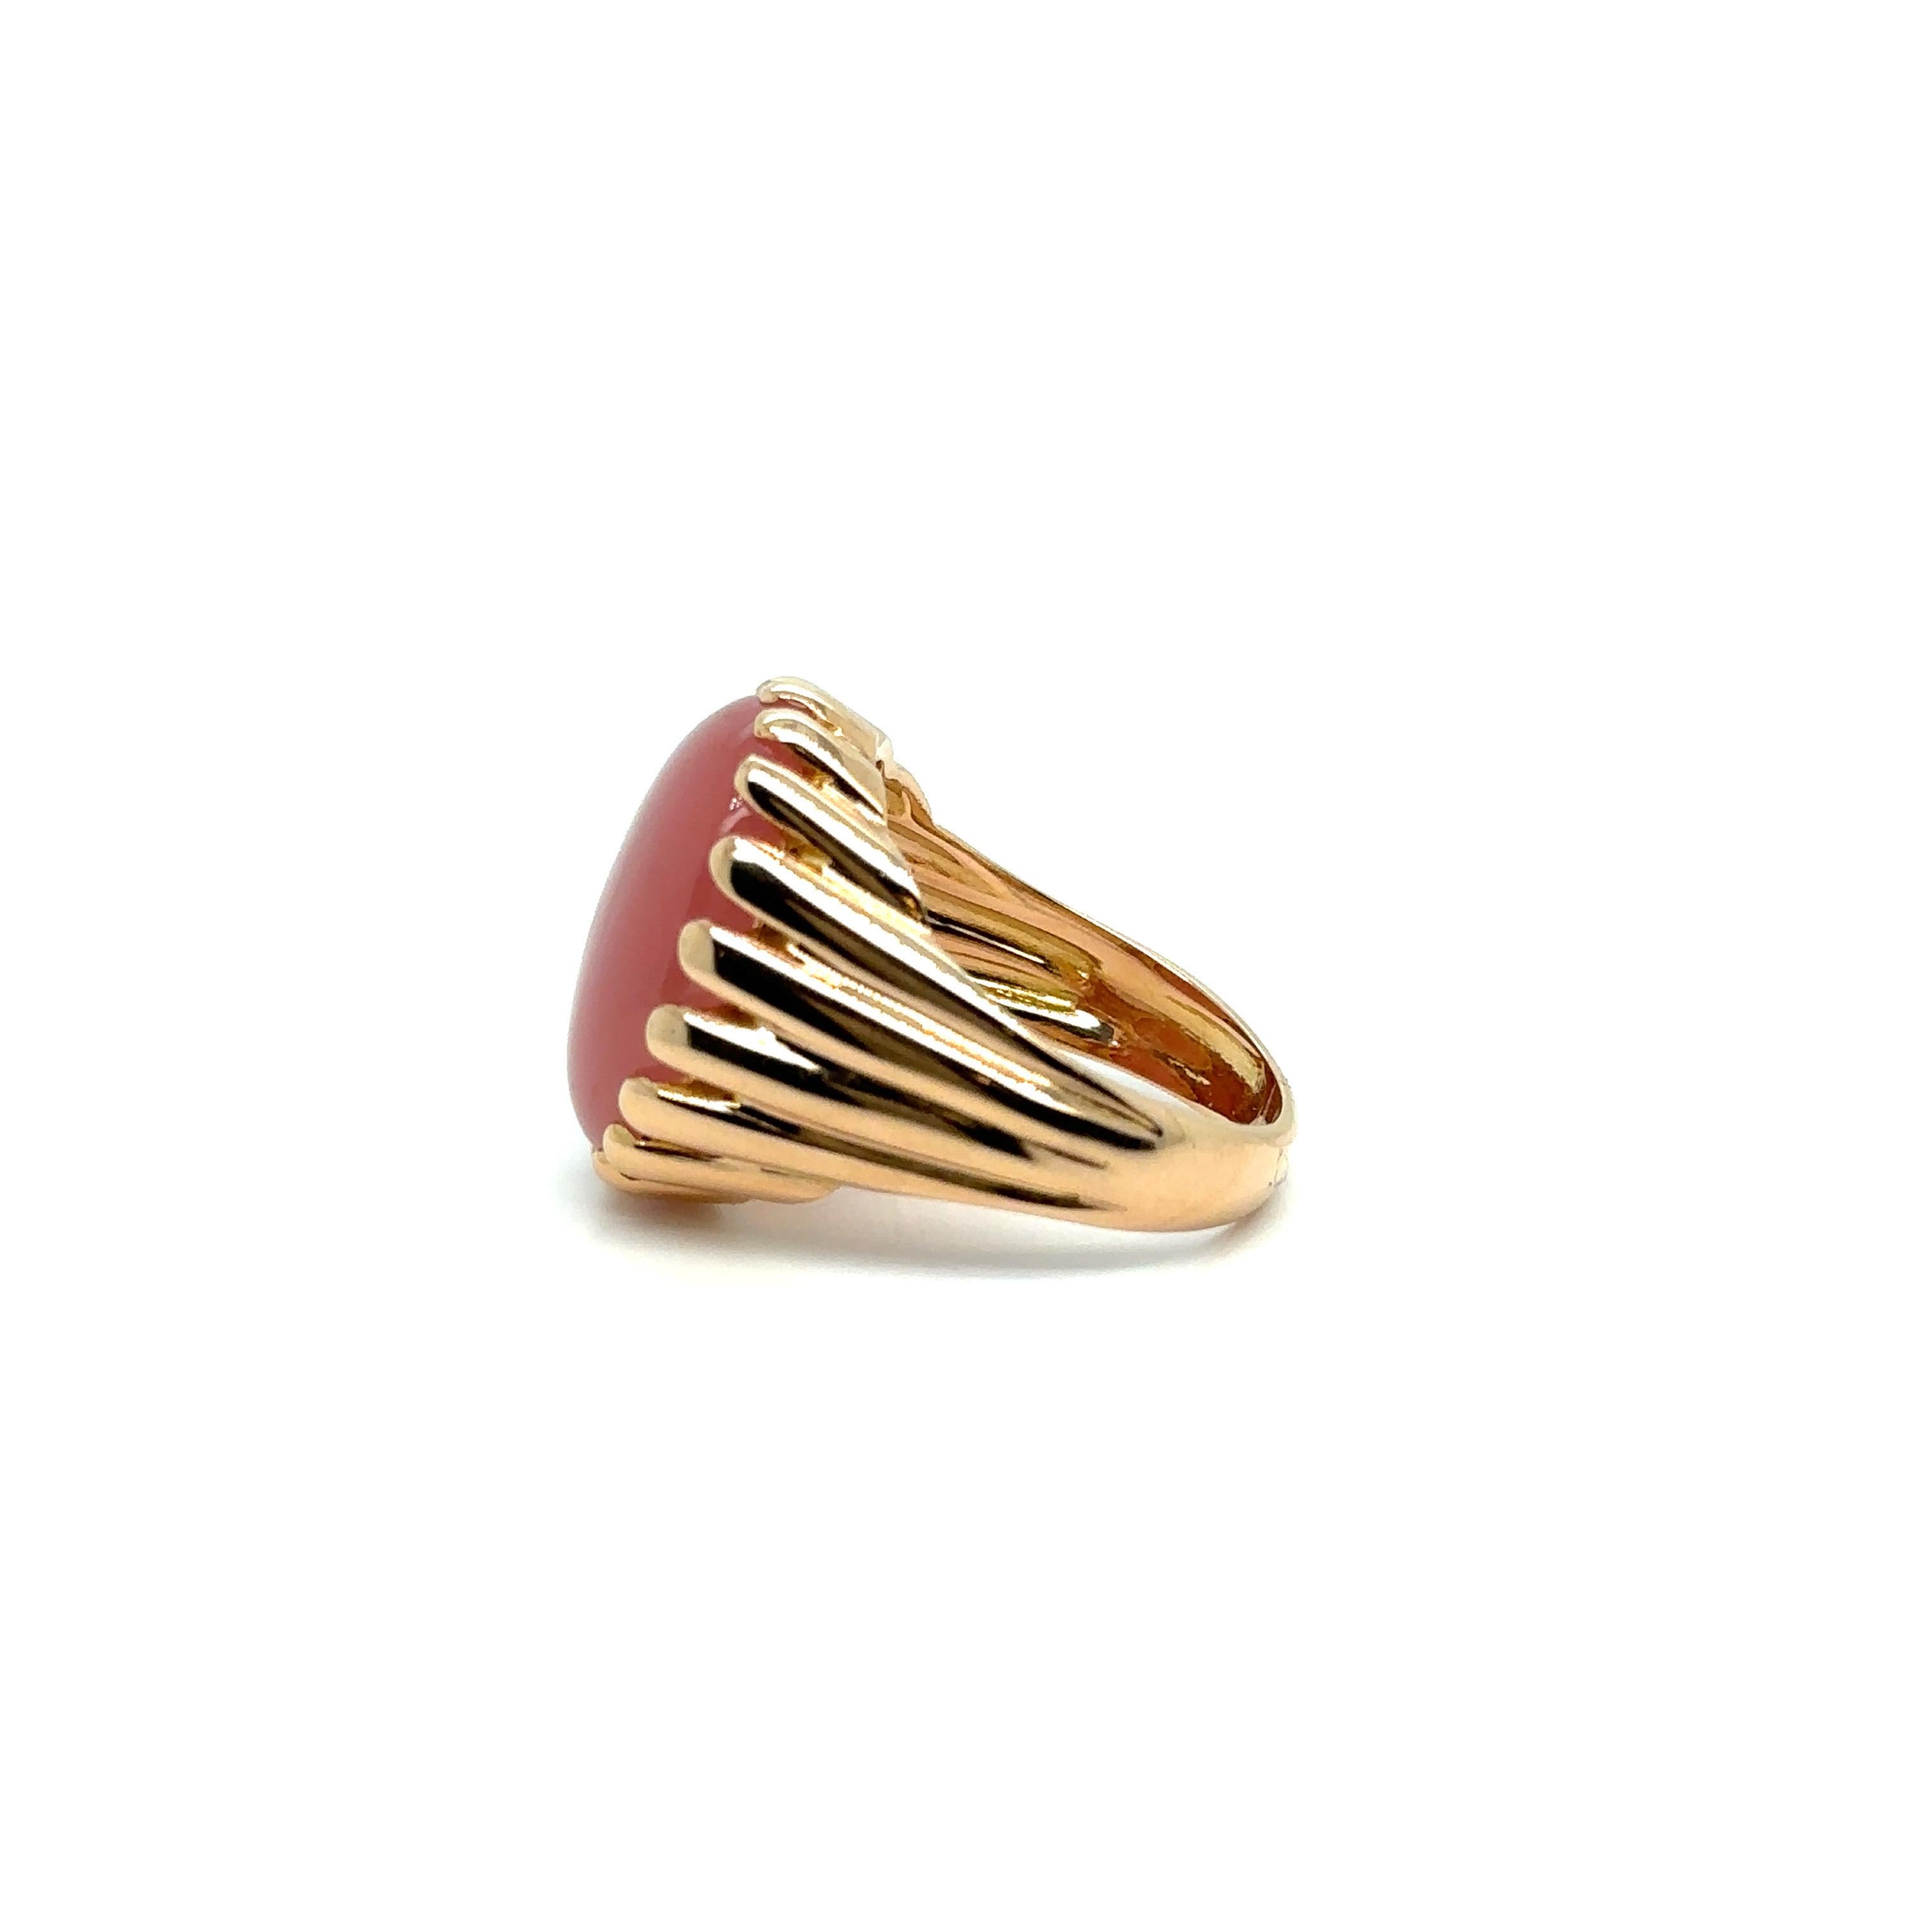 Discover this magnificent signet ring adorned with a guava quartz cabochon, a truly exceptional piece of jewelry. With its generous dimensions of 15 mm x 20 mm, the guava quartz cabochon is a real eye-catcher. This 18-carat rose gold ring is a